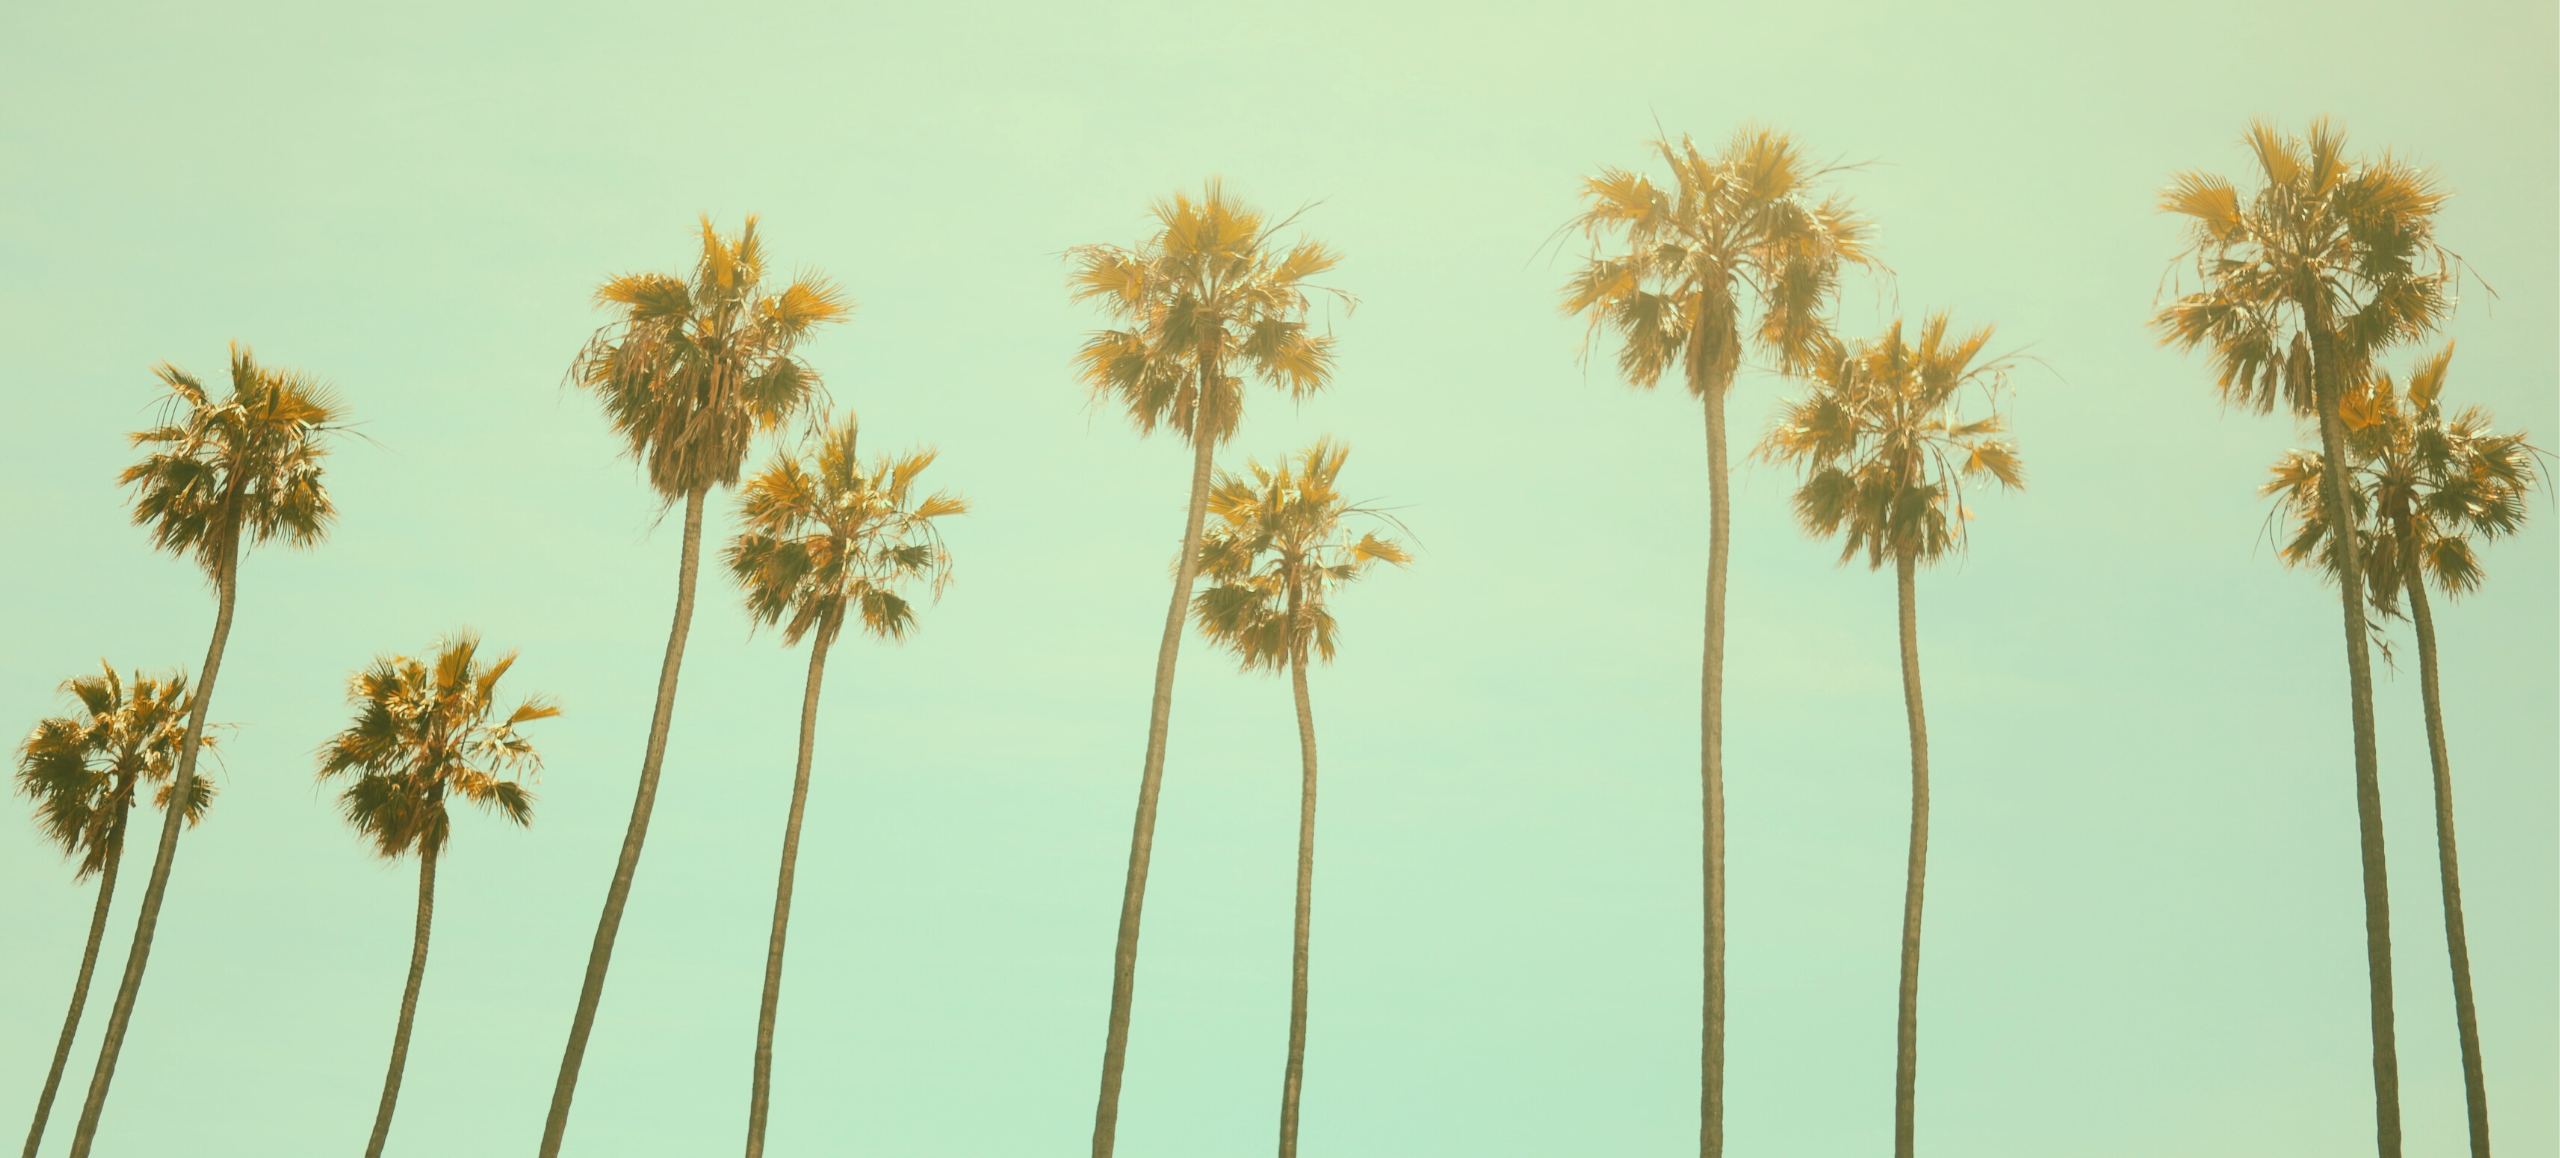 Photo of a line of tall palm trees